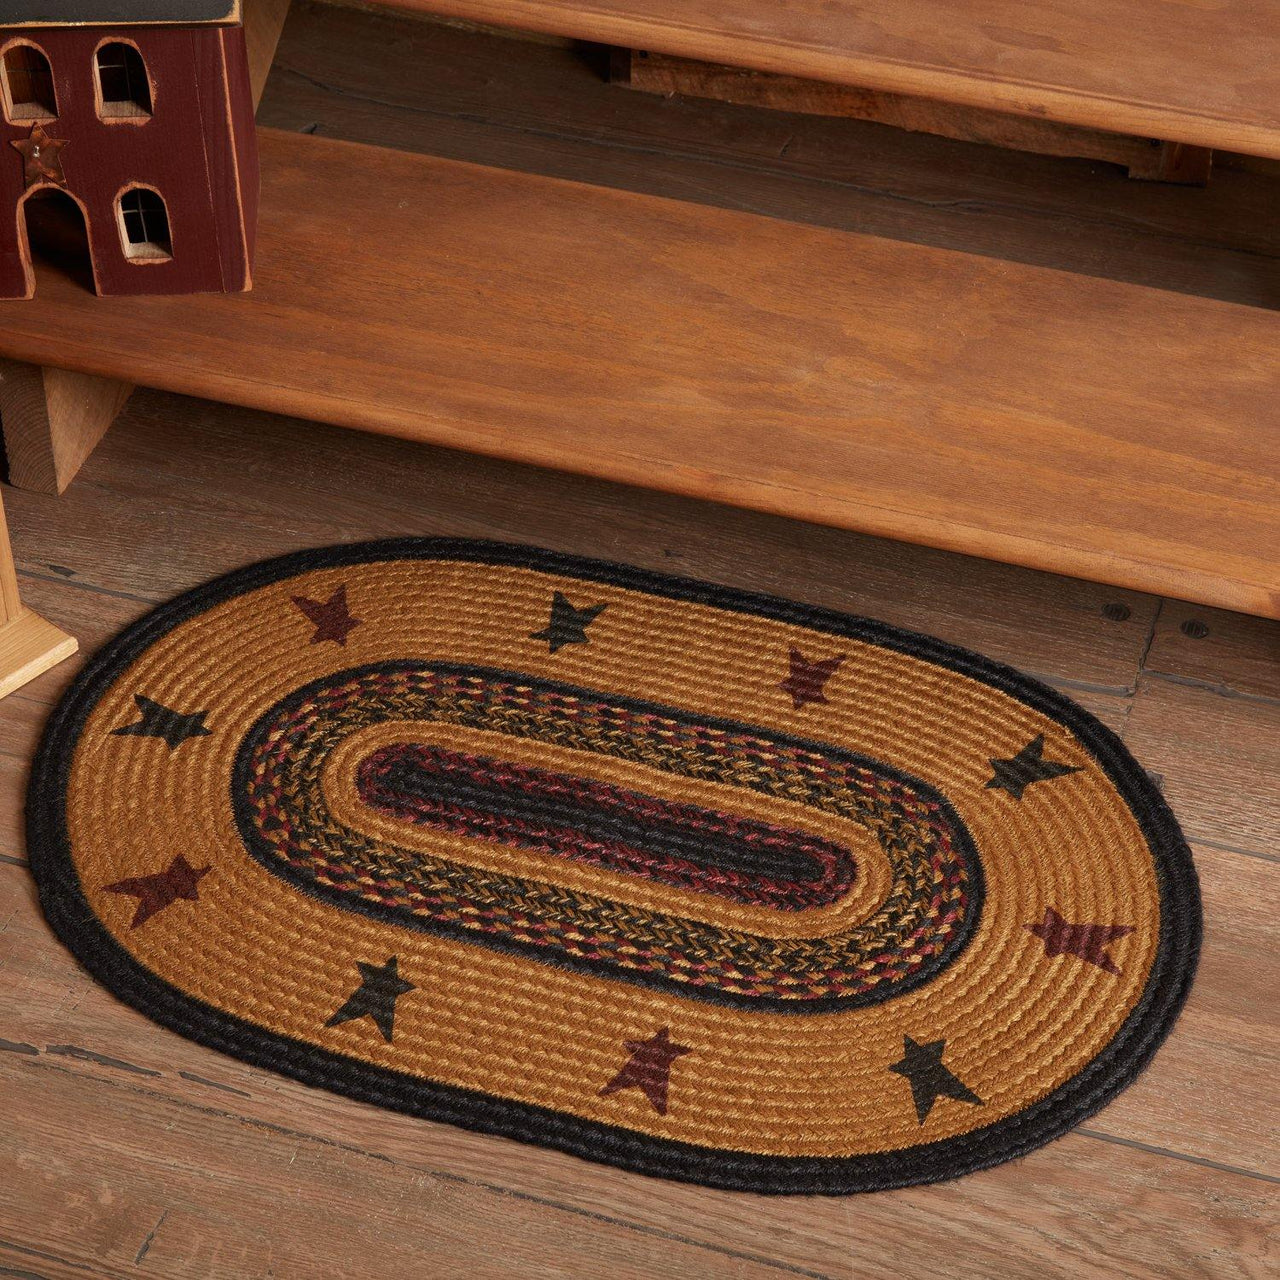 Heritage Farms Star Jute Braided Oval Rug 20"x30" with Rug Pad VHC Brands - The Fox Decor